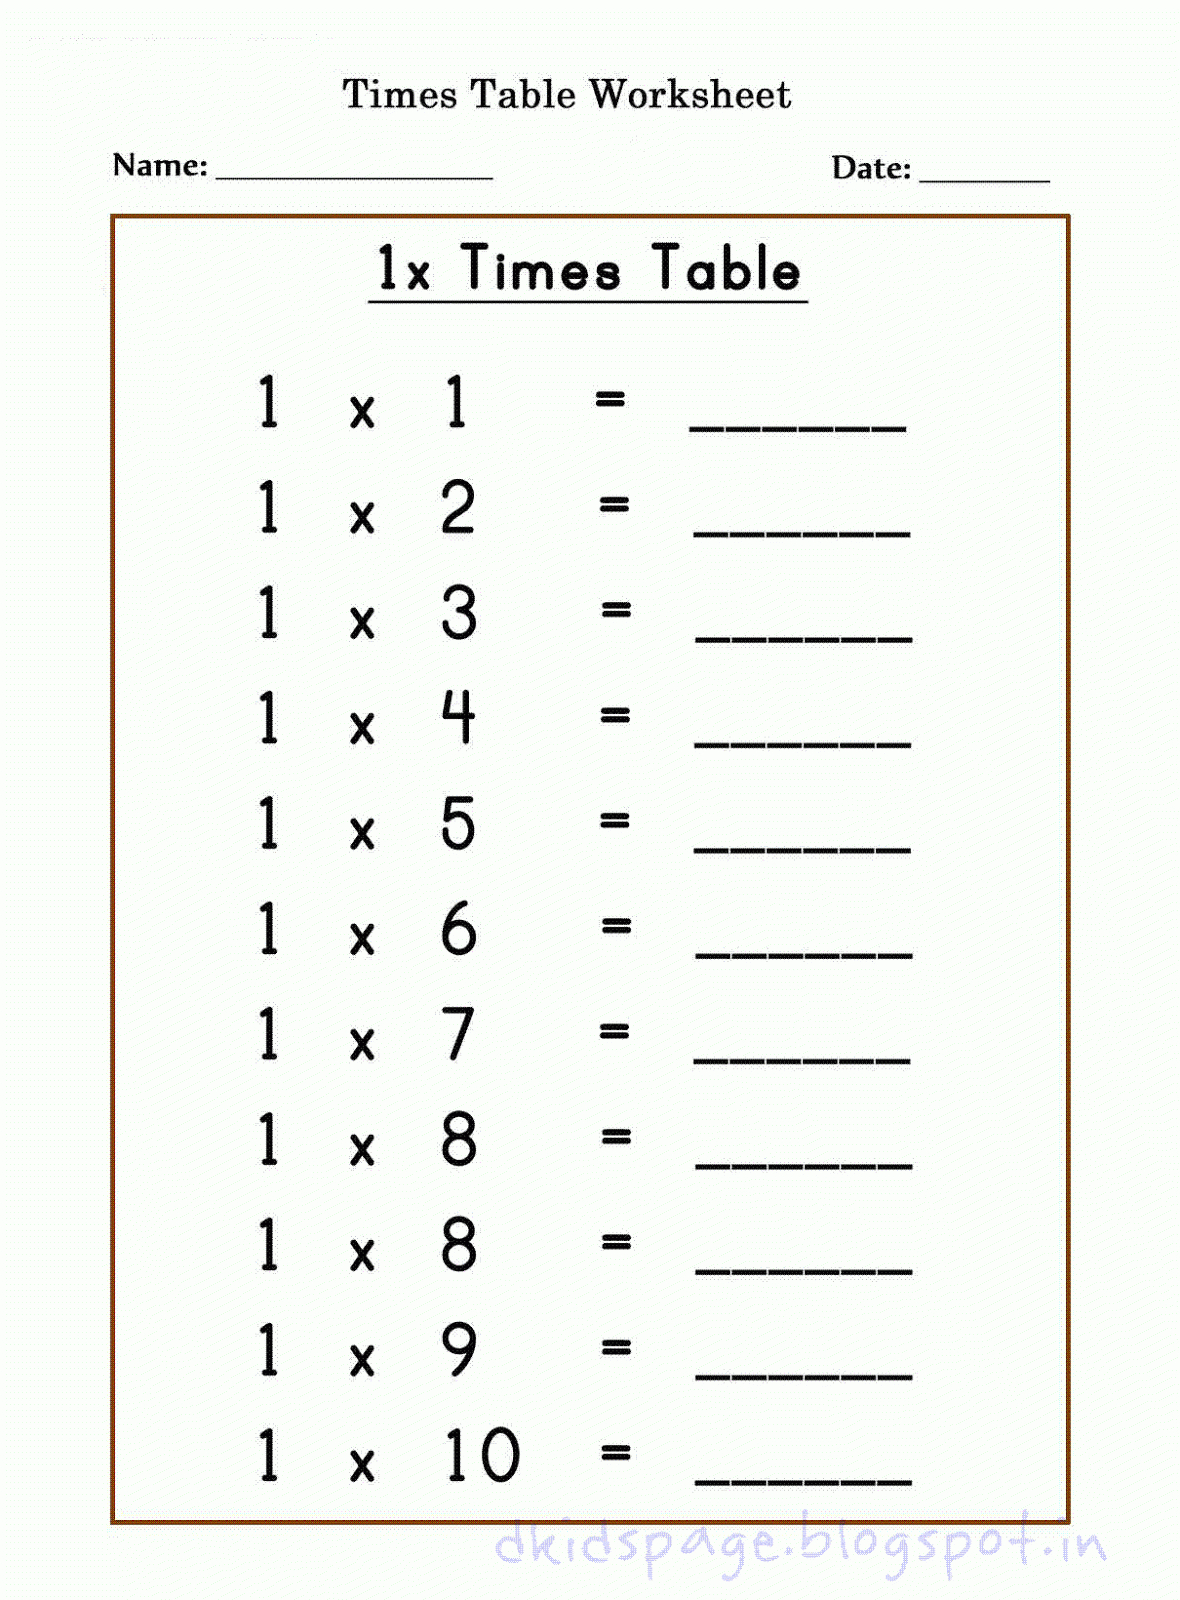 multiplication-worksheets-6-and-7-times-tables-printablemultiplication